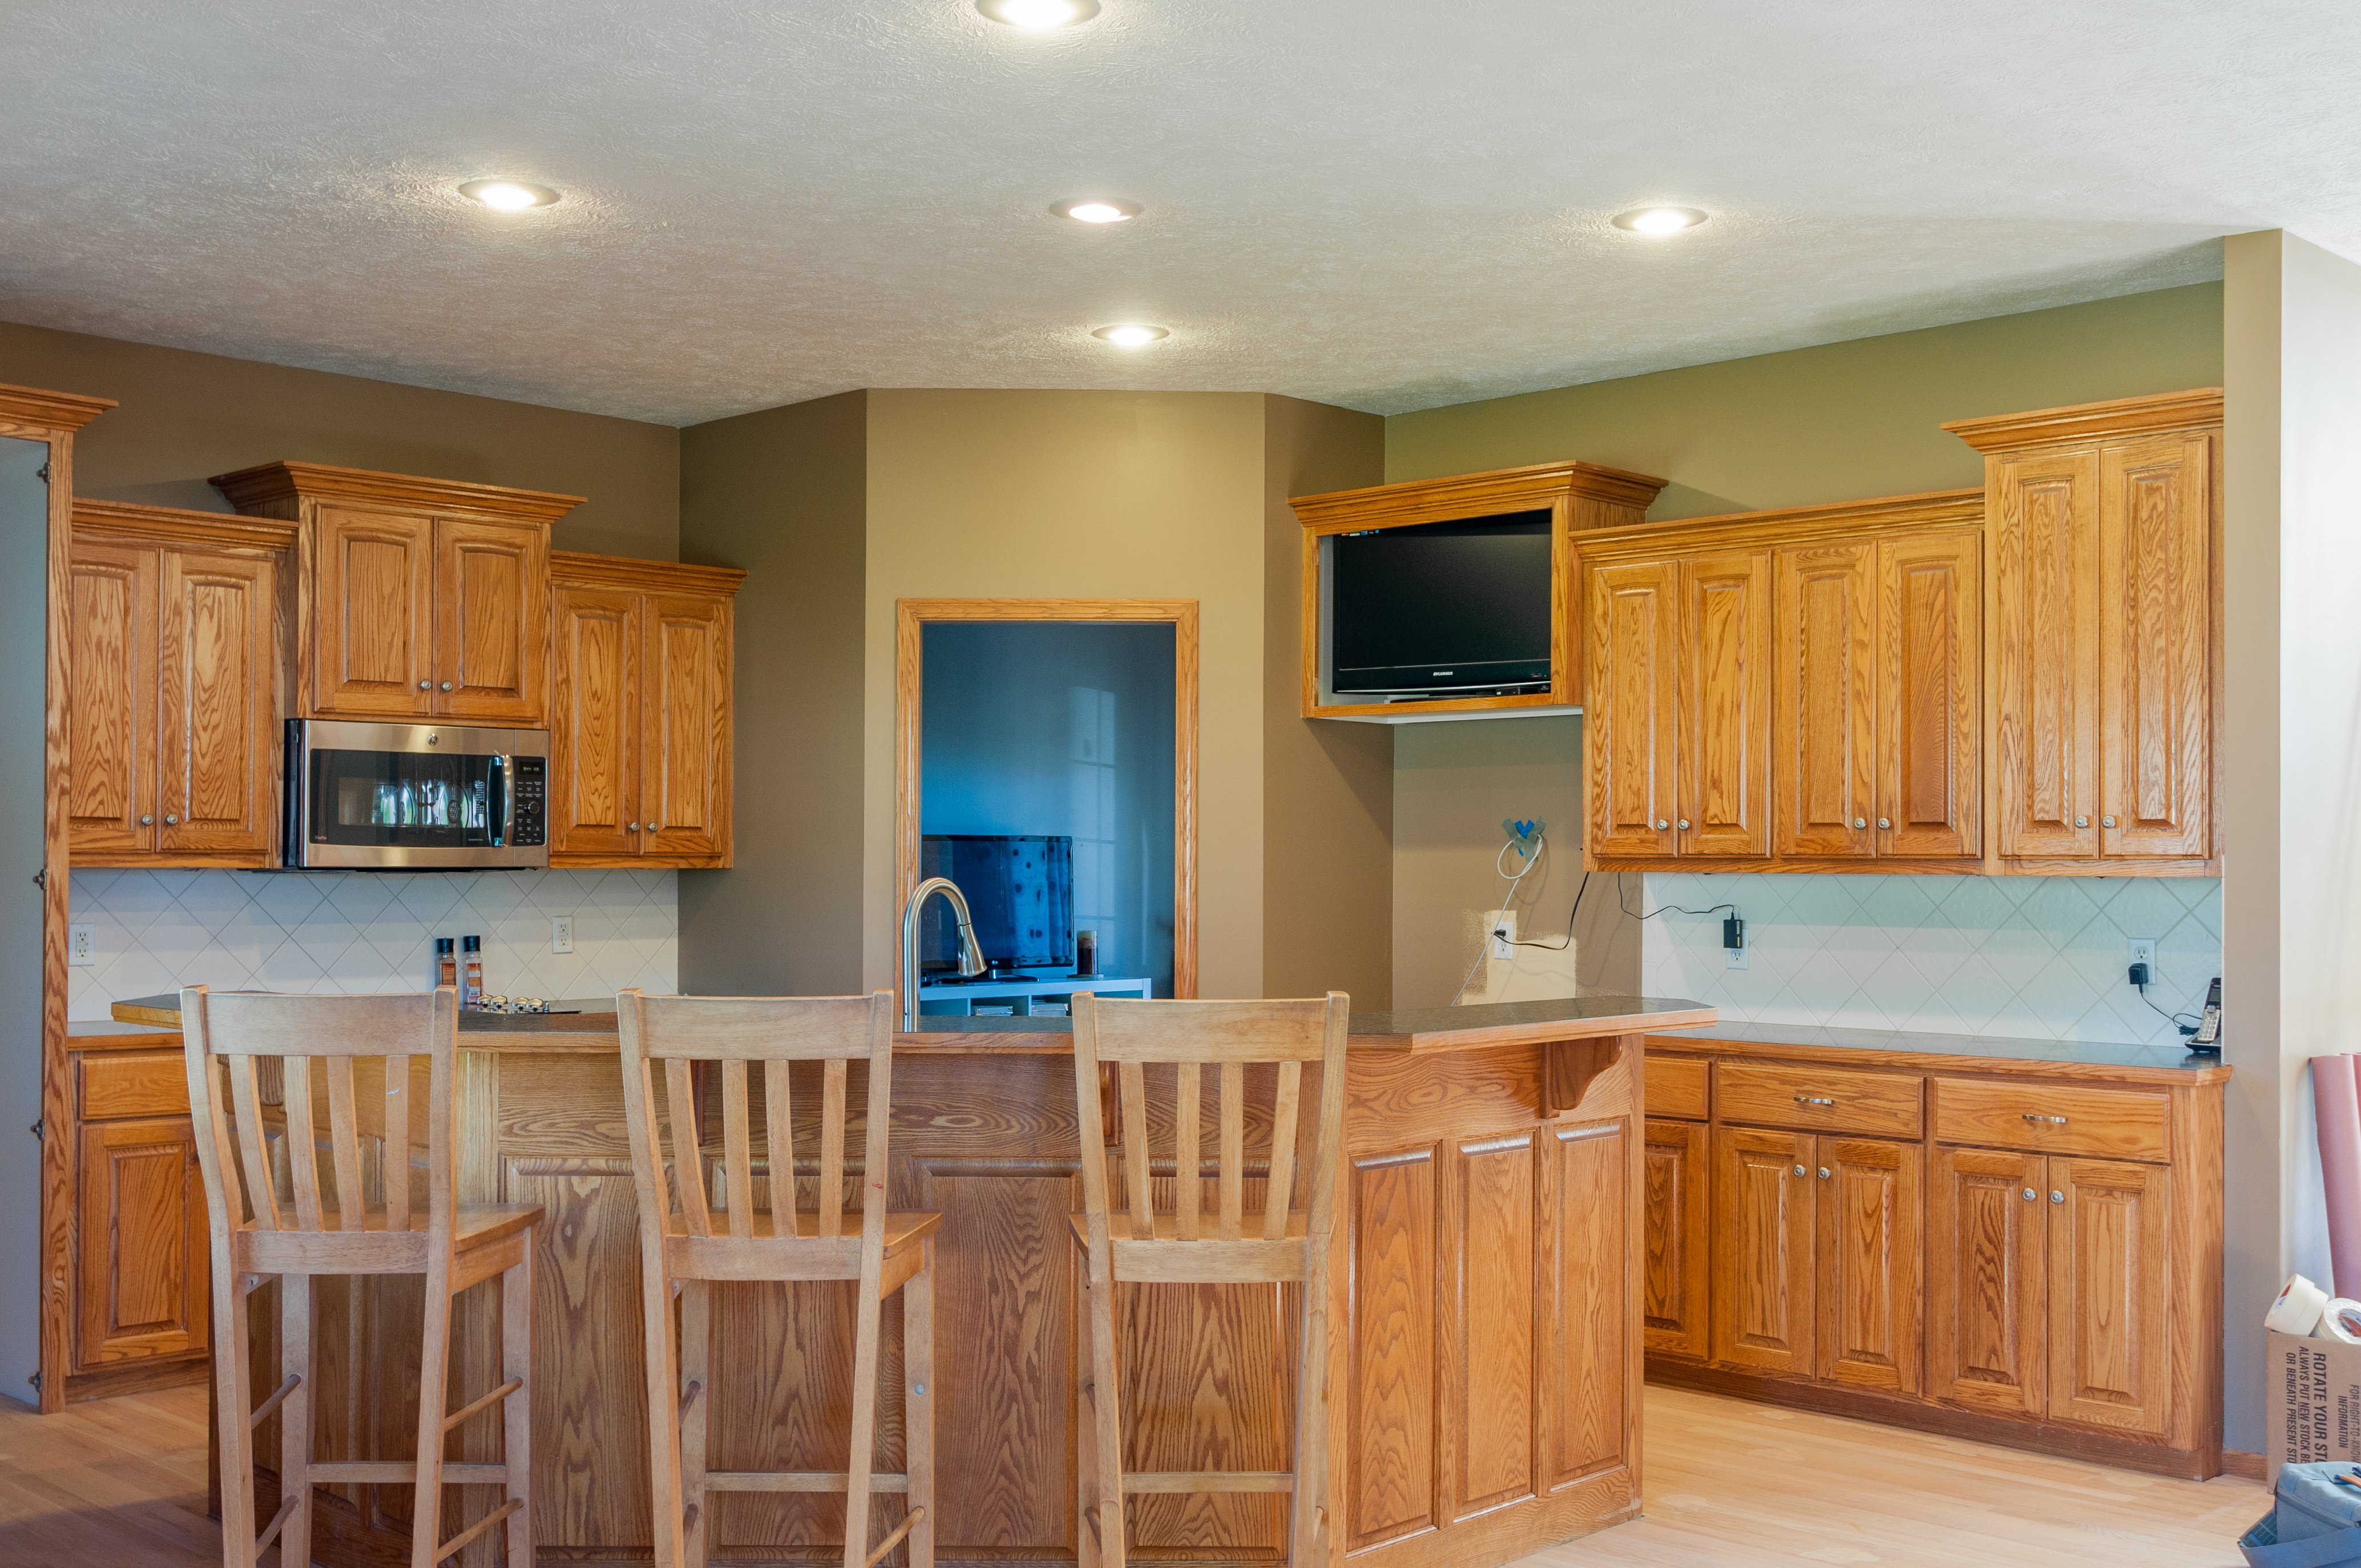 Kitchen cabinets and island with refinished oak wood. 